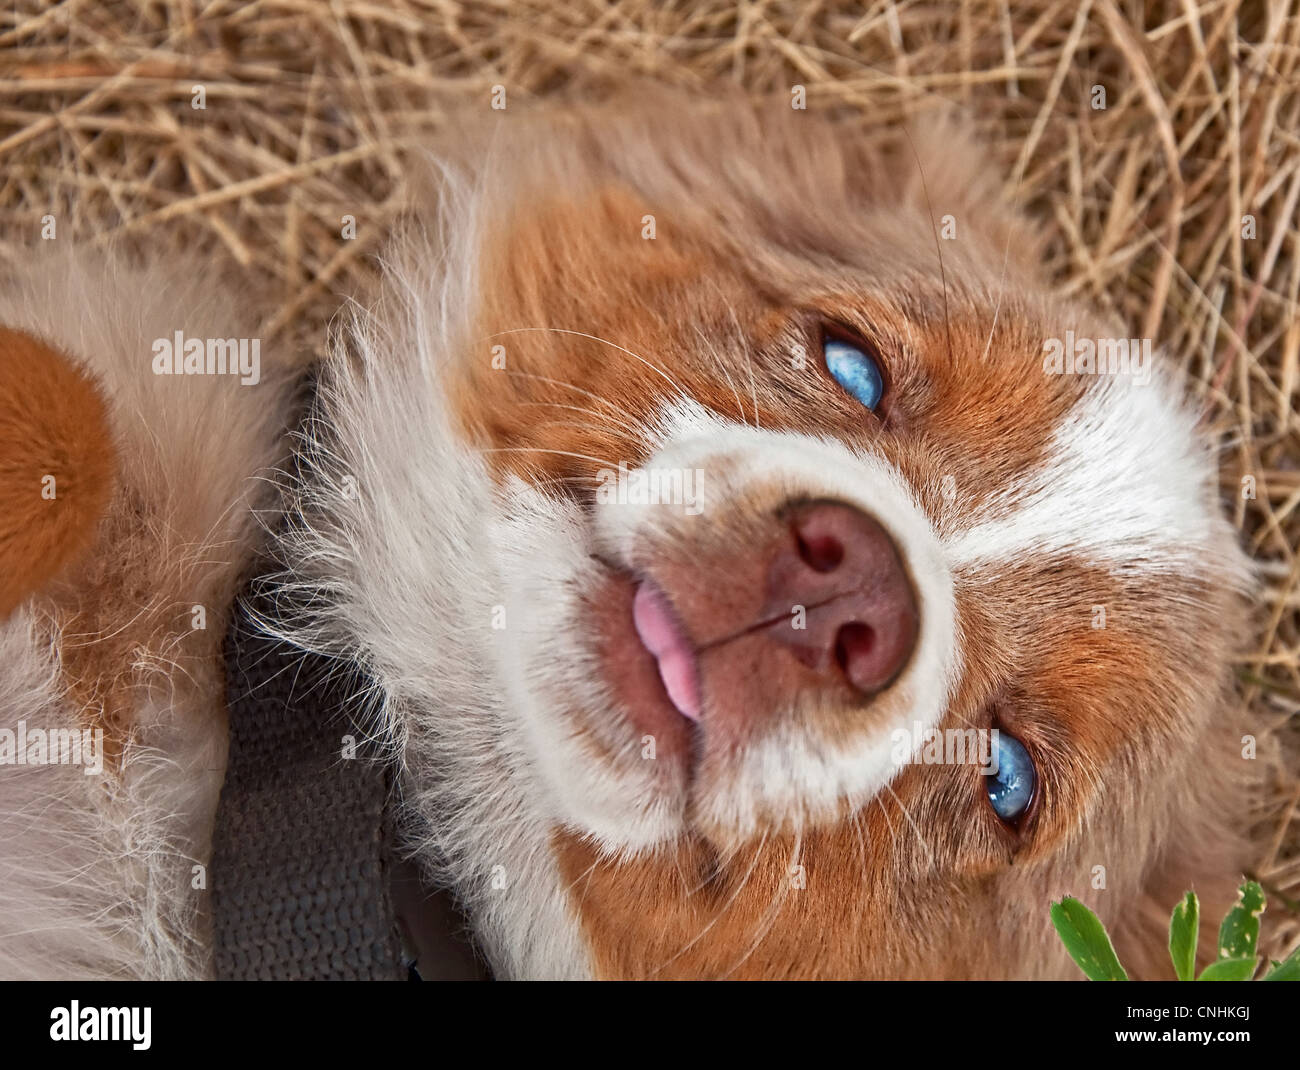 This cute blue eyed Australian Shepherd puppy is lying in it's back with his face looking into camera and tongue sticking out. Stock Photo